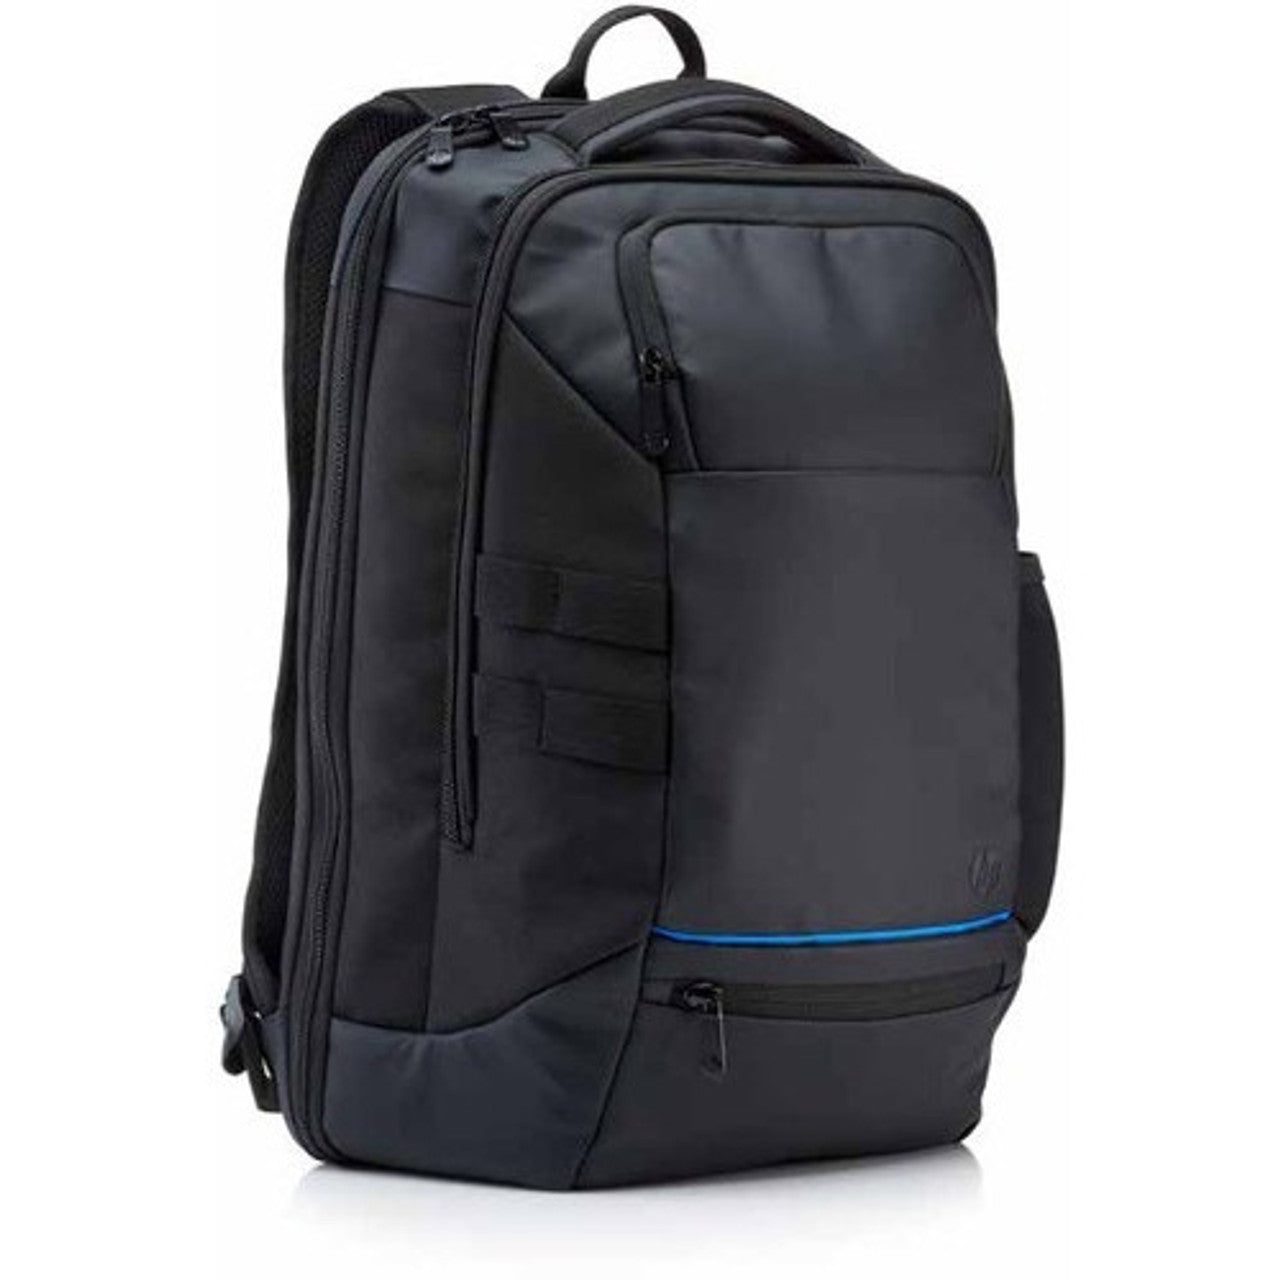 HP Recycled Series 15.6" Backpack for Notebook Laptop - Black